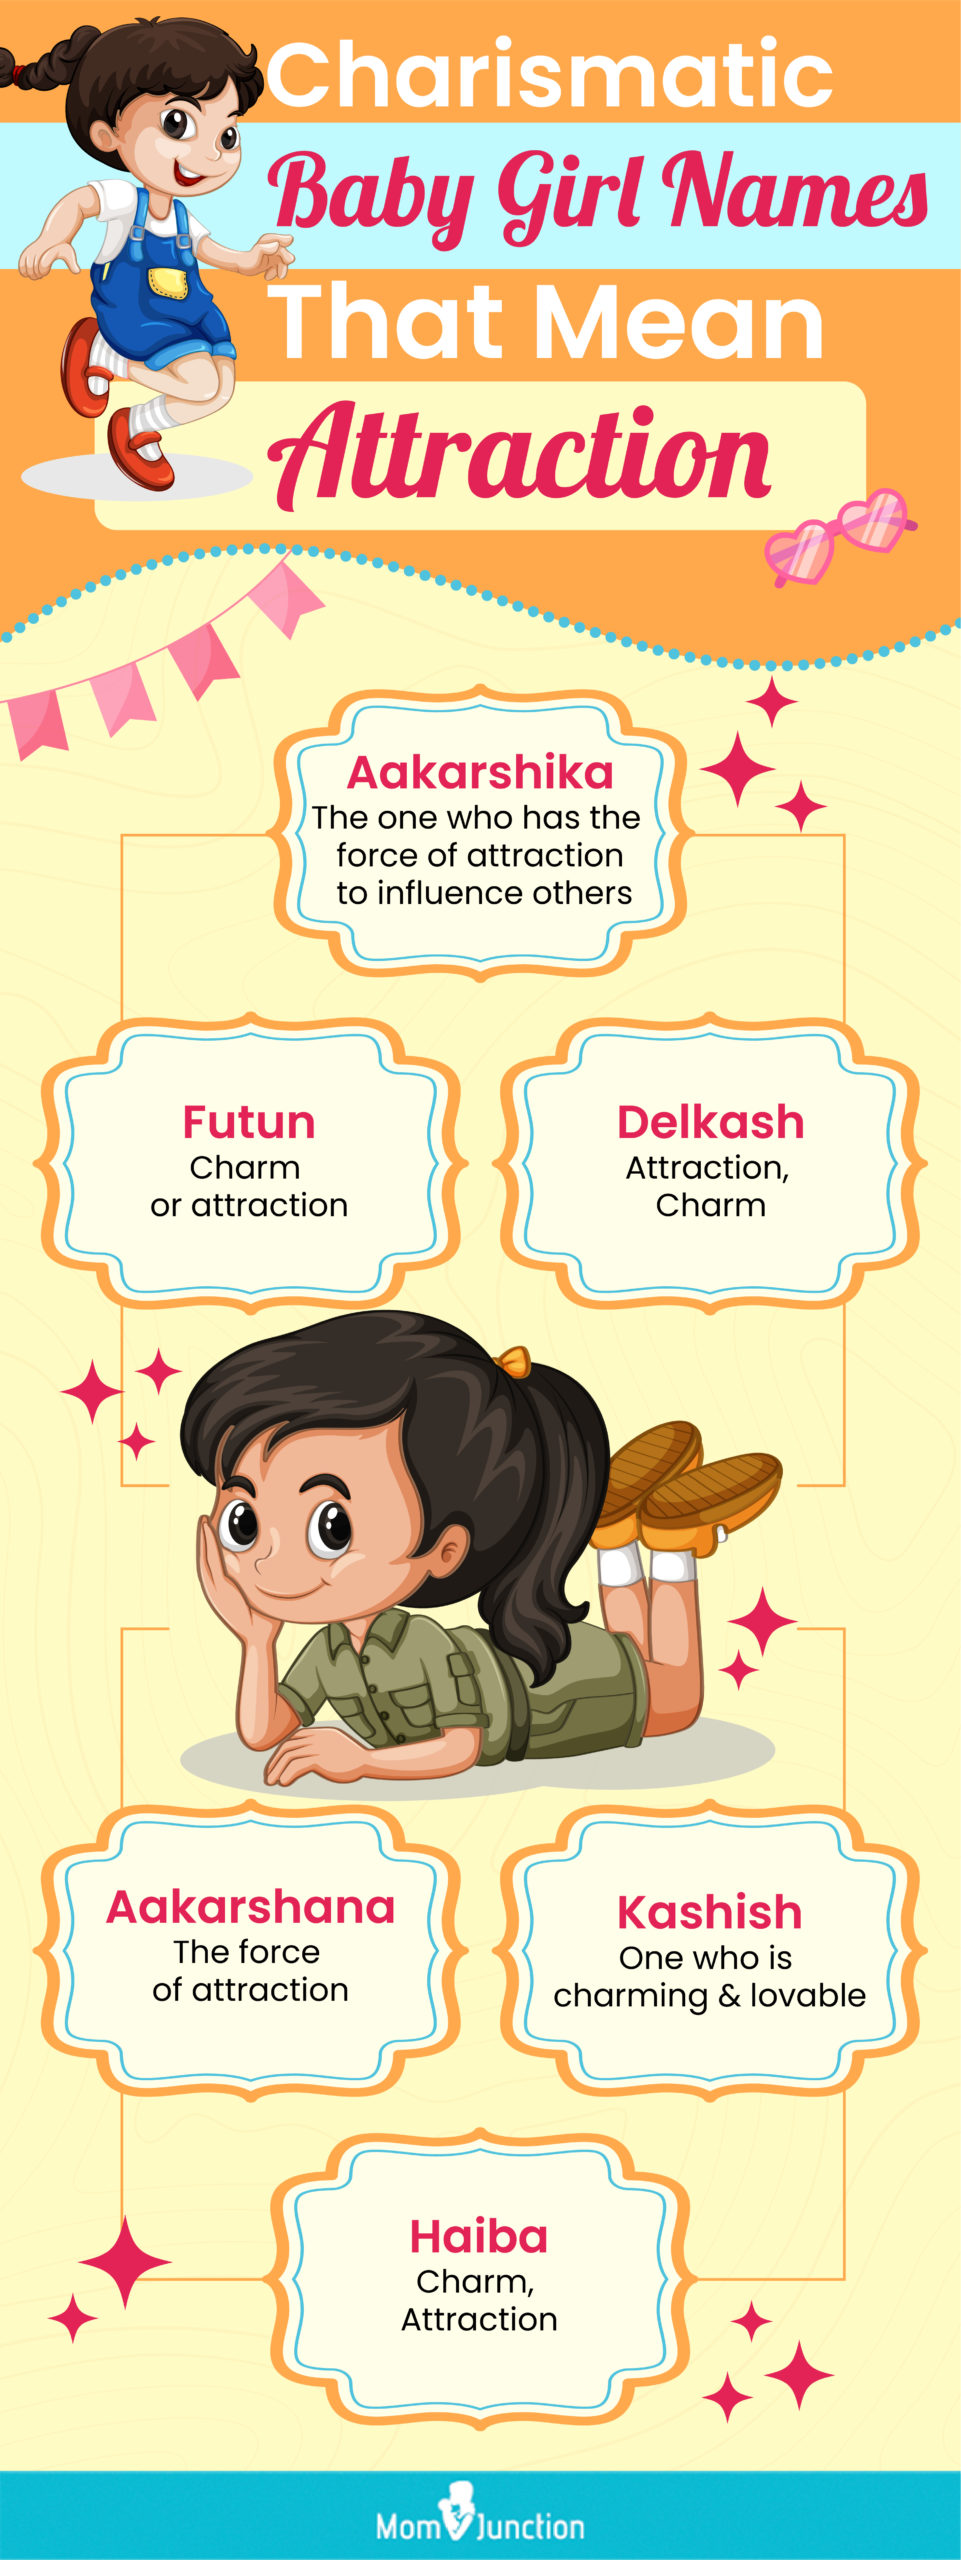 charismatic baby girl names that mean attraction (infographic)